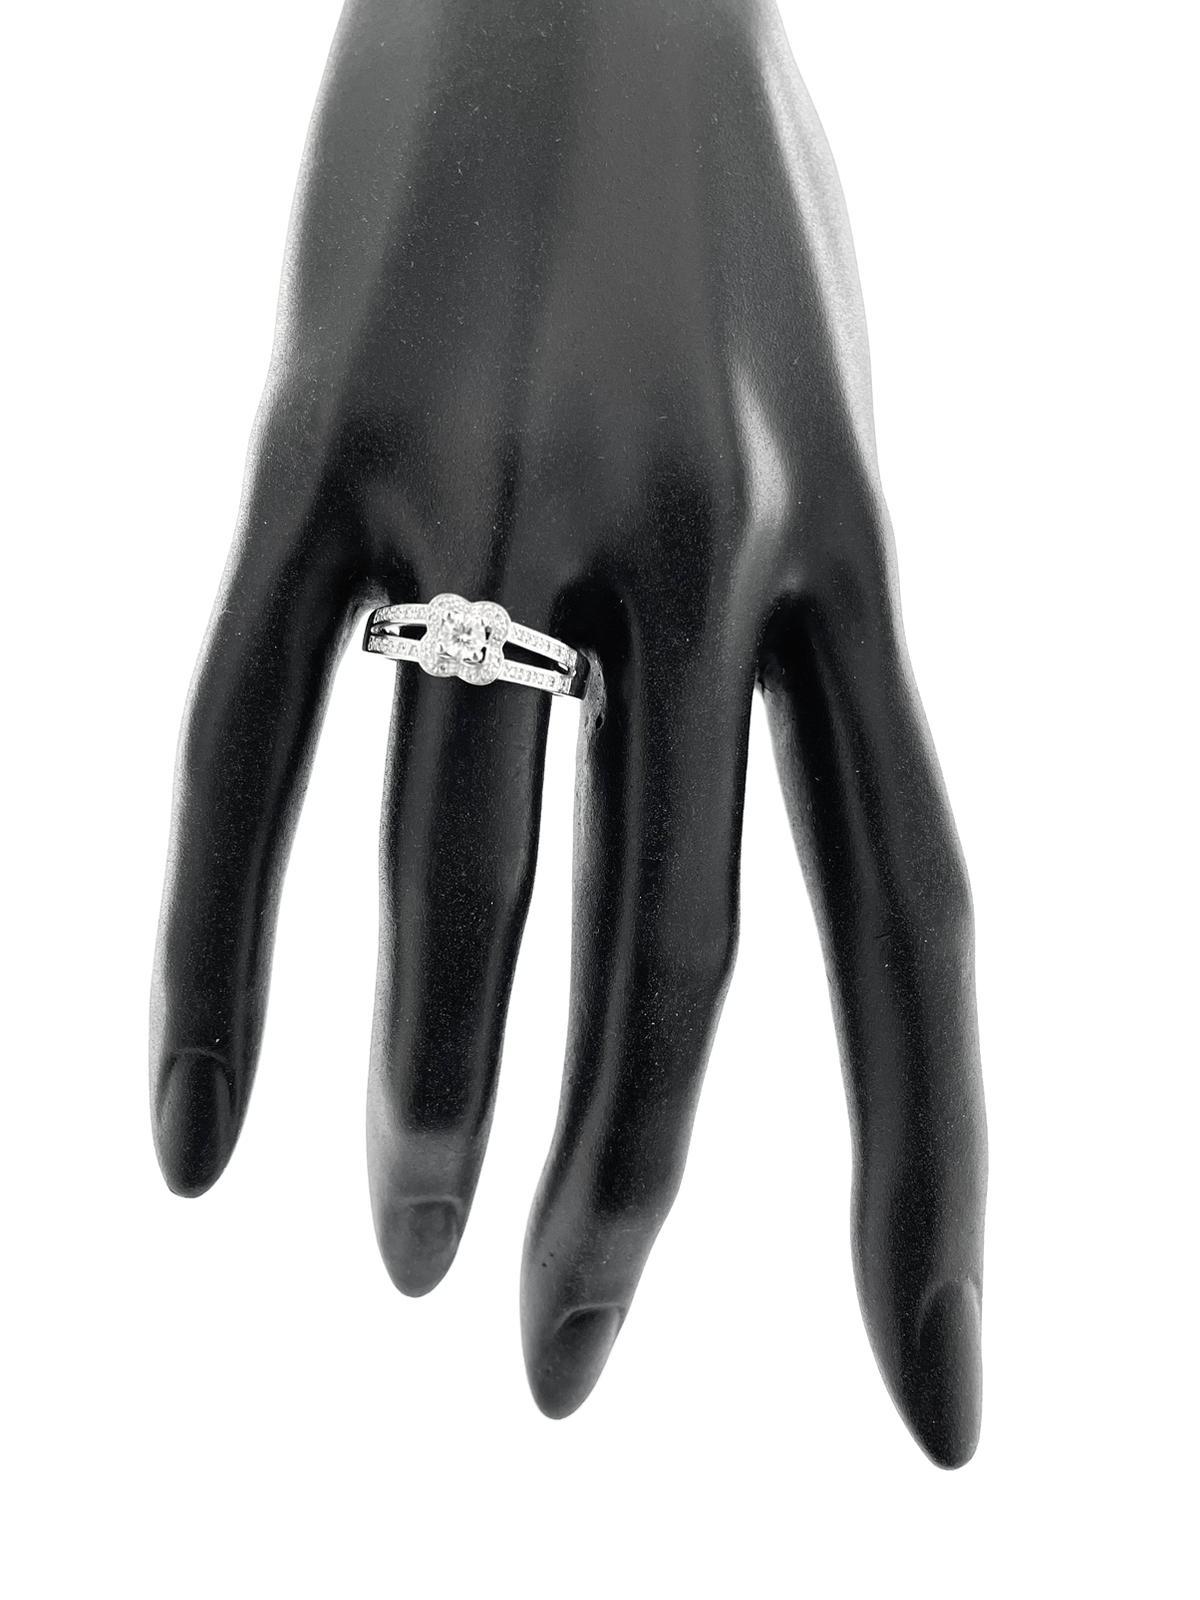 Brilliant Cut Mauboussin Chance of Love N°2 White Gold Engagement Ring with Diamonds For Sale